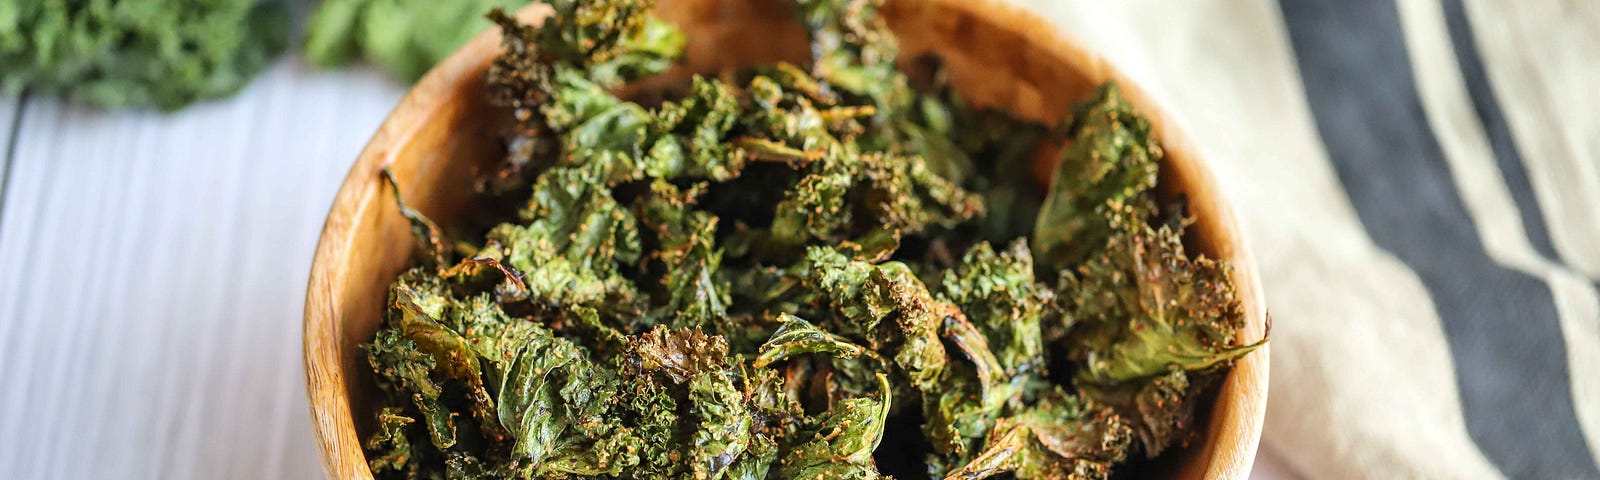 Wooden bowl filled with kale chips